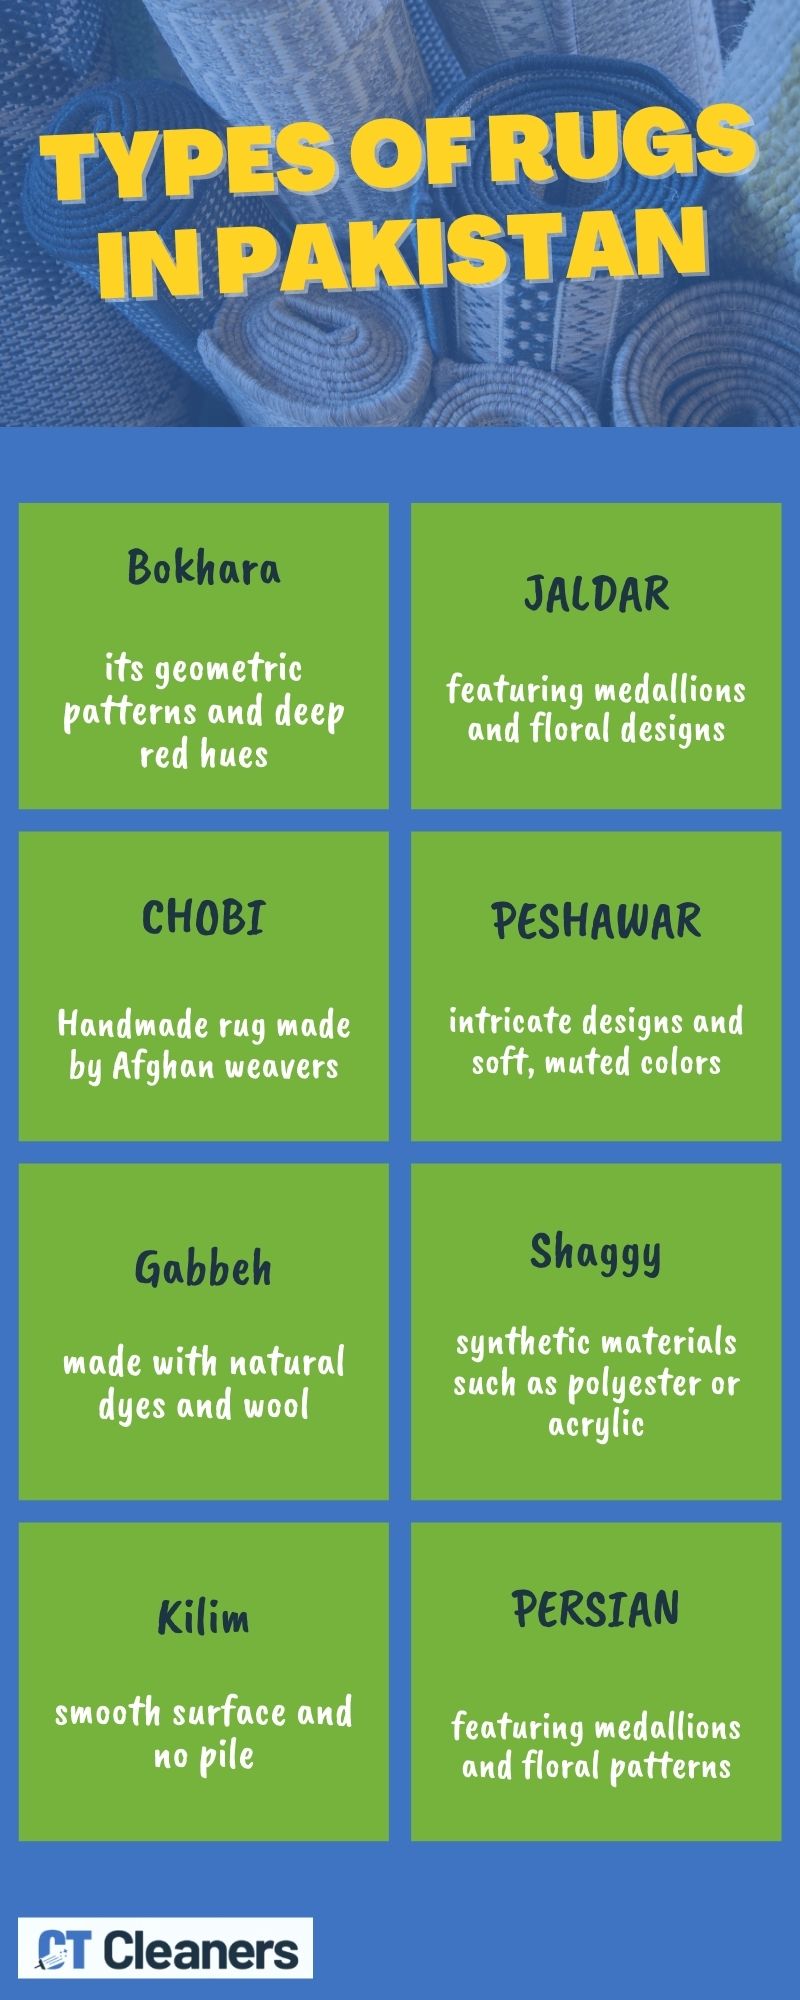 Types of Rugs in Pakistan